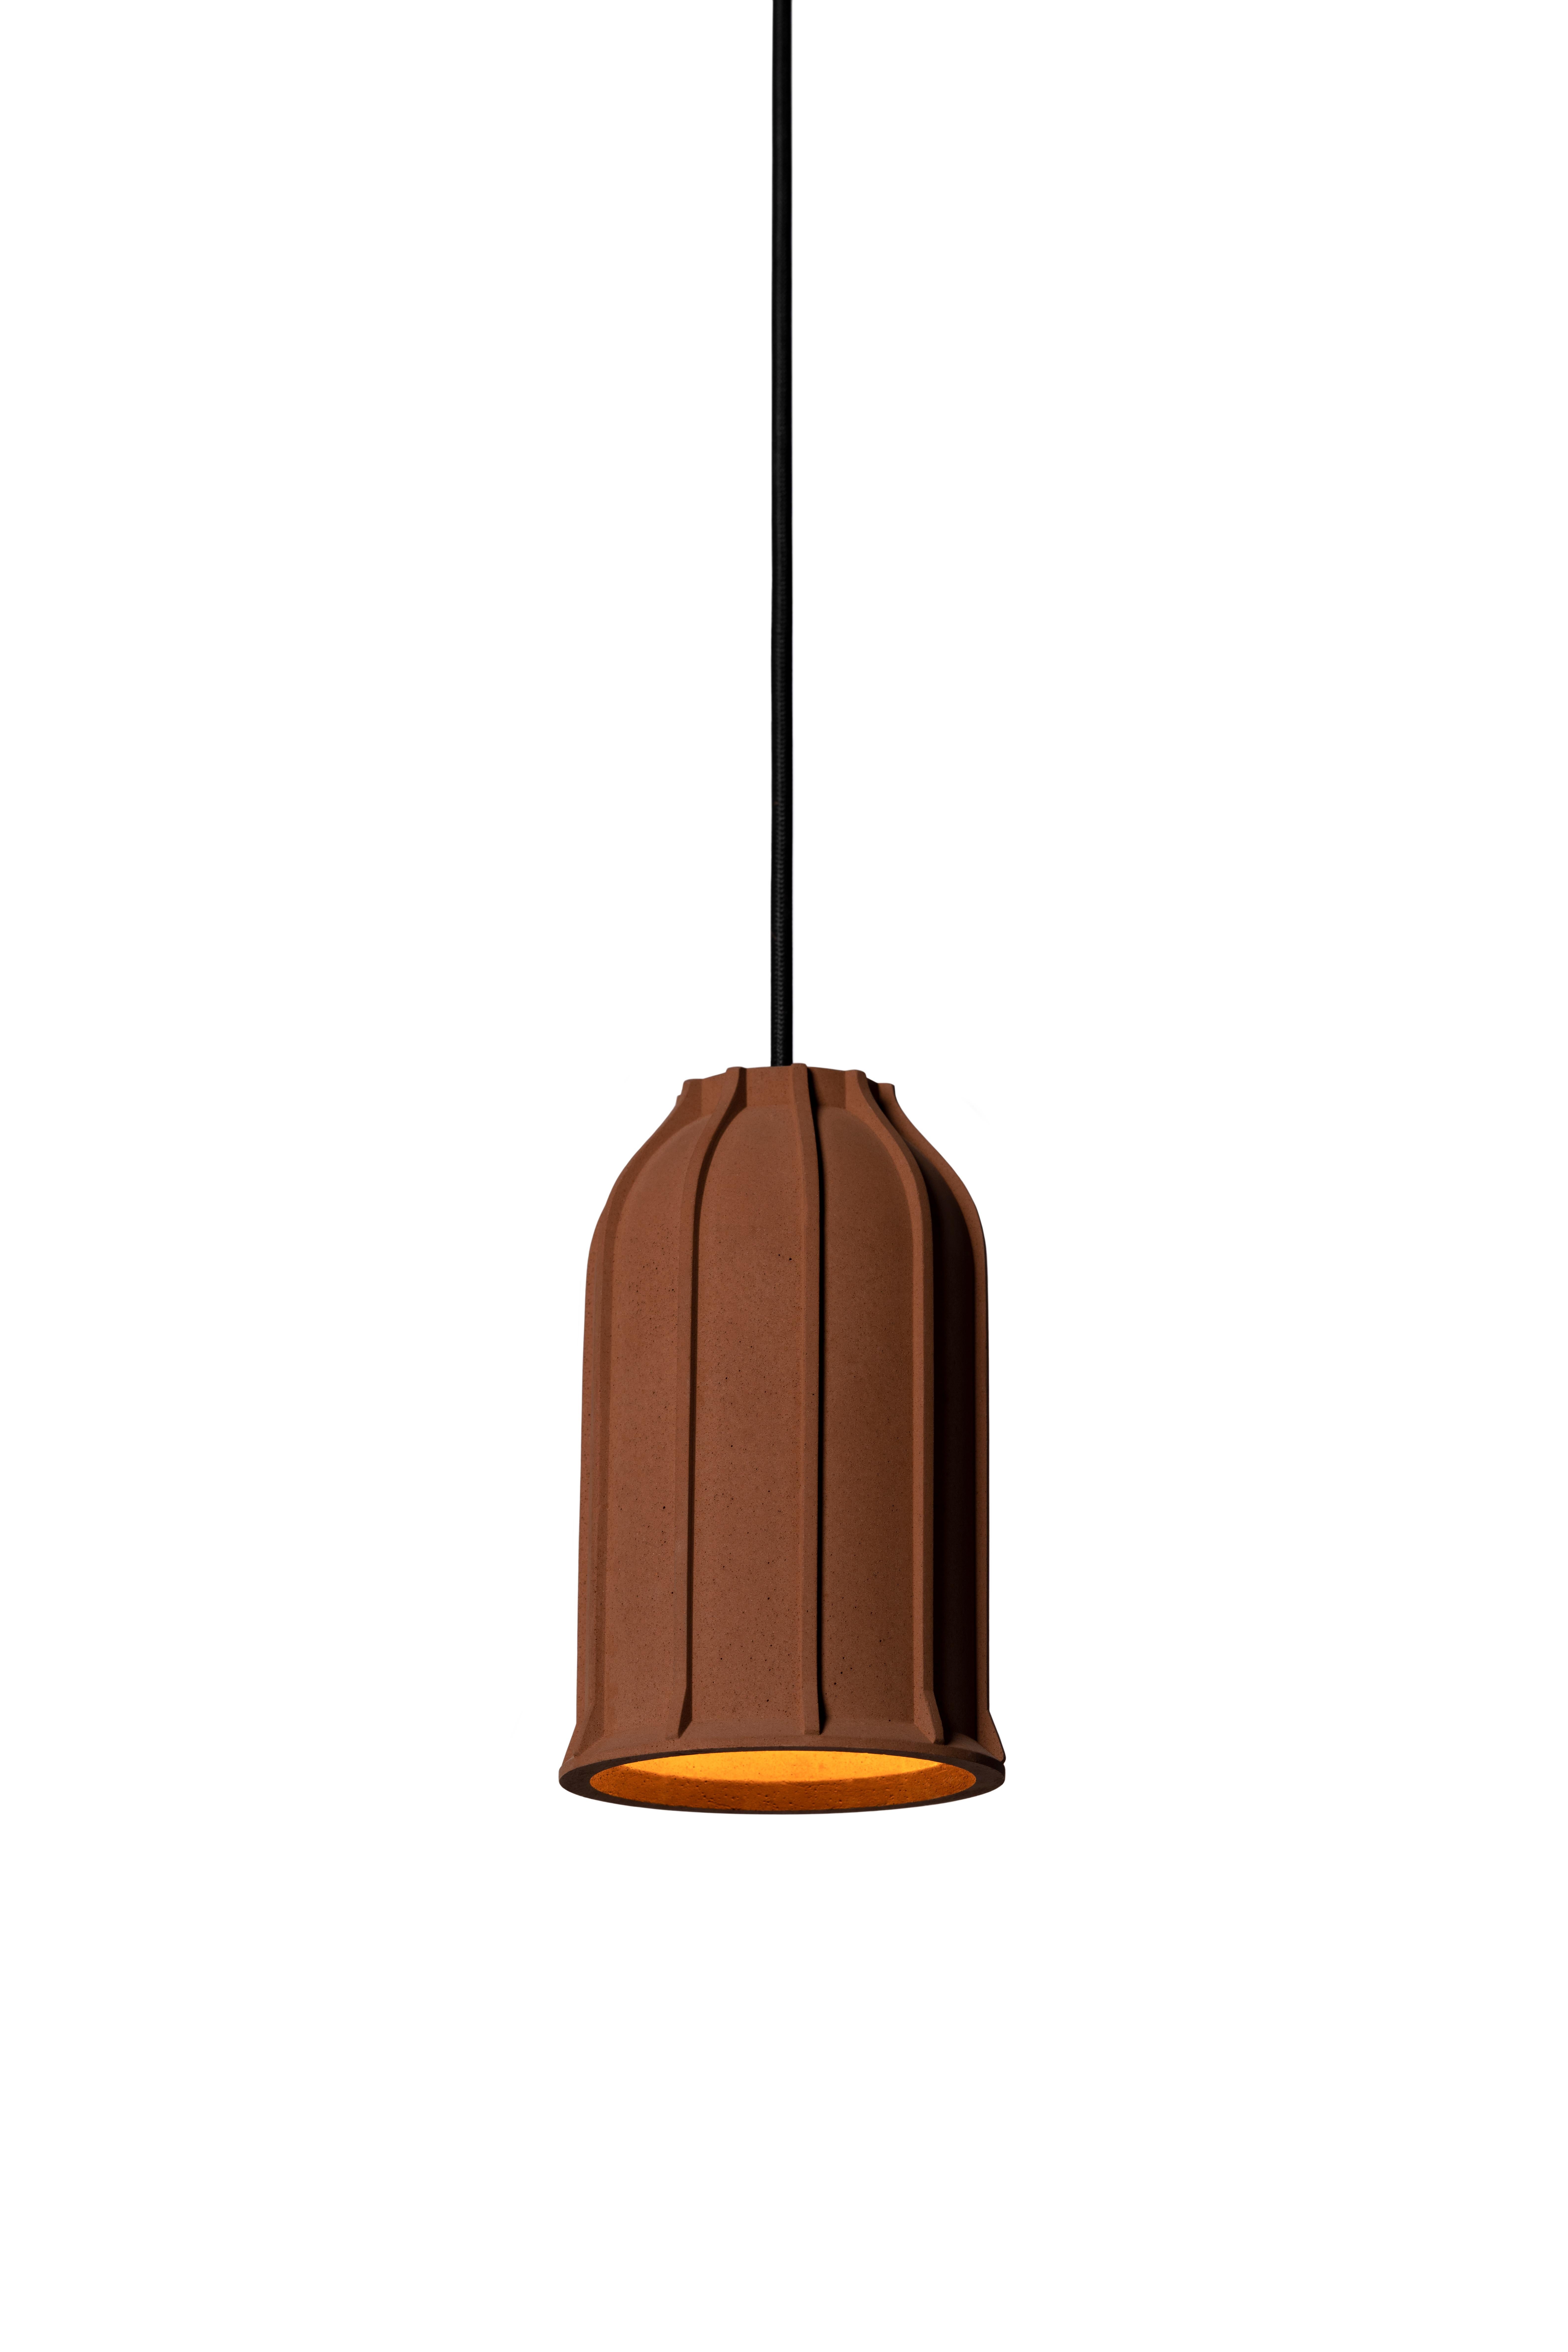 Pendant lamp 'U' by Nongzao x Bentu Design.
Material: Terracotta 
Color: Earthy brown 

Measures: 18.5 cm high, 11.5 cm diameter
Wire: 3 meters (black)
Lamp type: AC 100-240V 50-60Hz  9W - Comptable with US electric system.

Variations:
- Color: